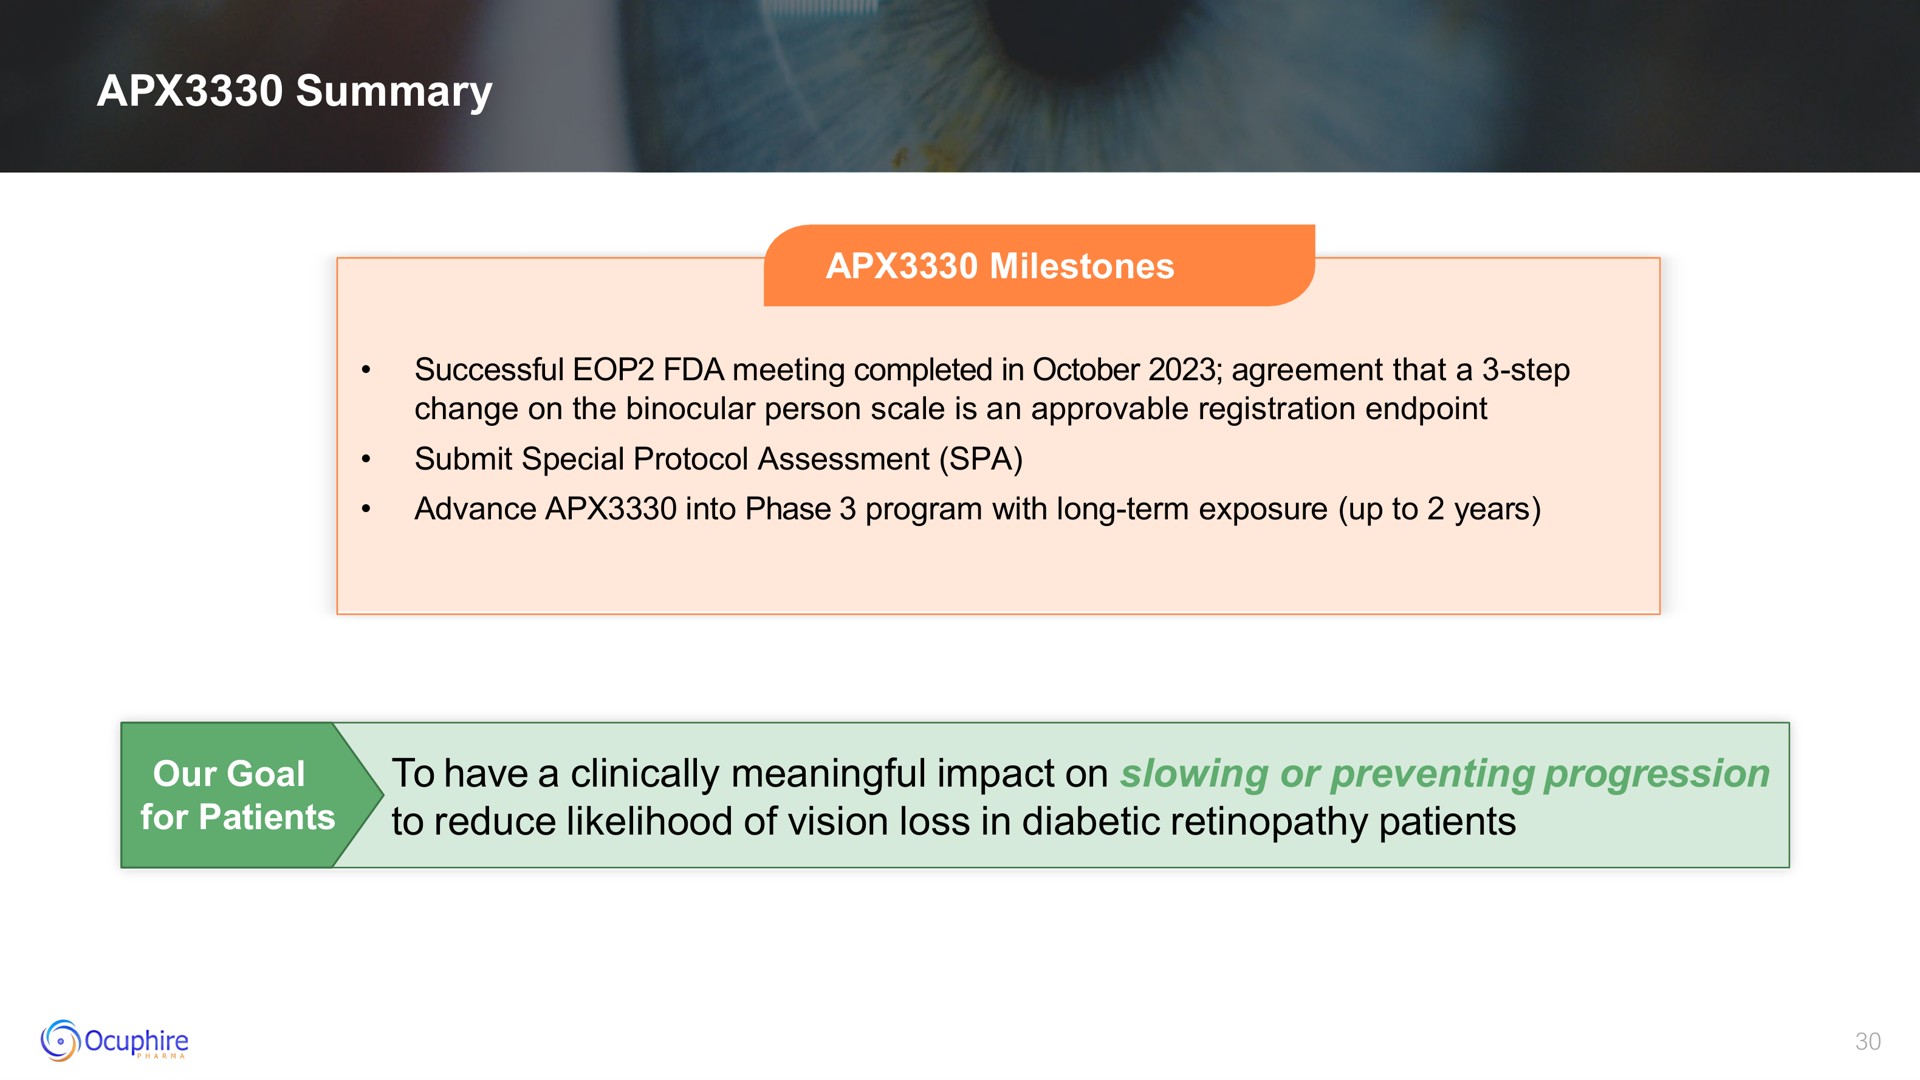 summary to have a clinically meaningful impact on slowing or preventing progression to reduce likelihood of vision loss in diabetic patients owing | Ocuphire Pharma